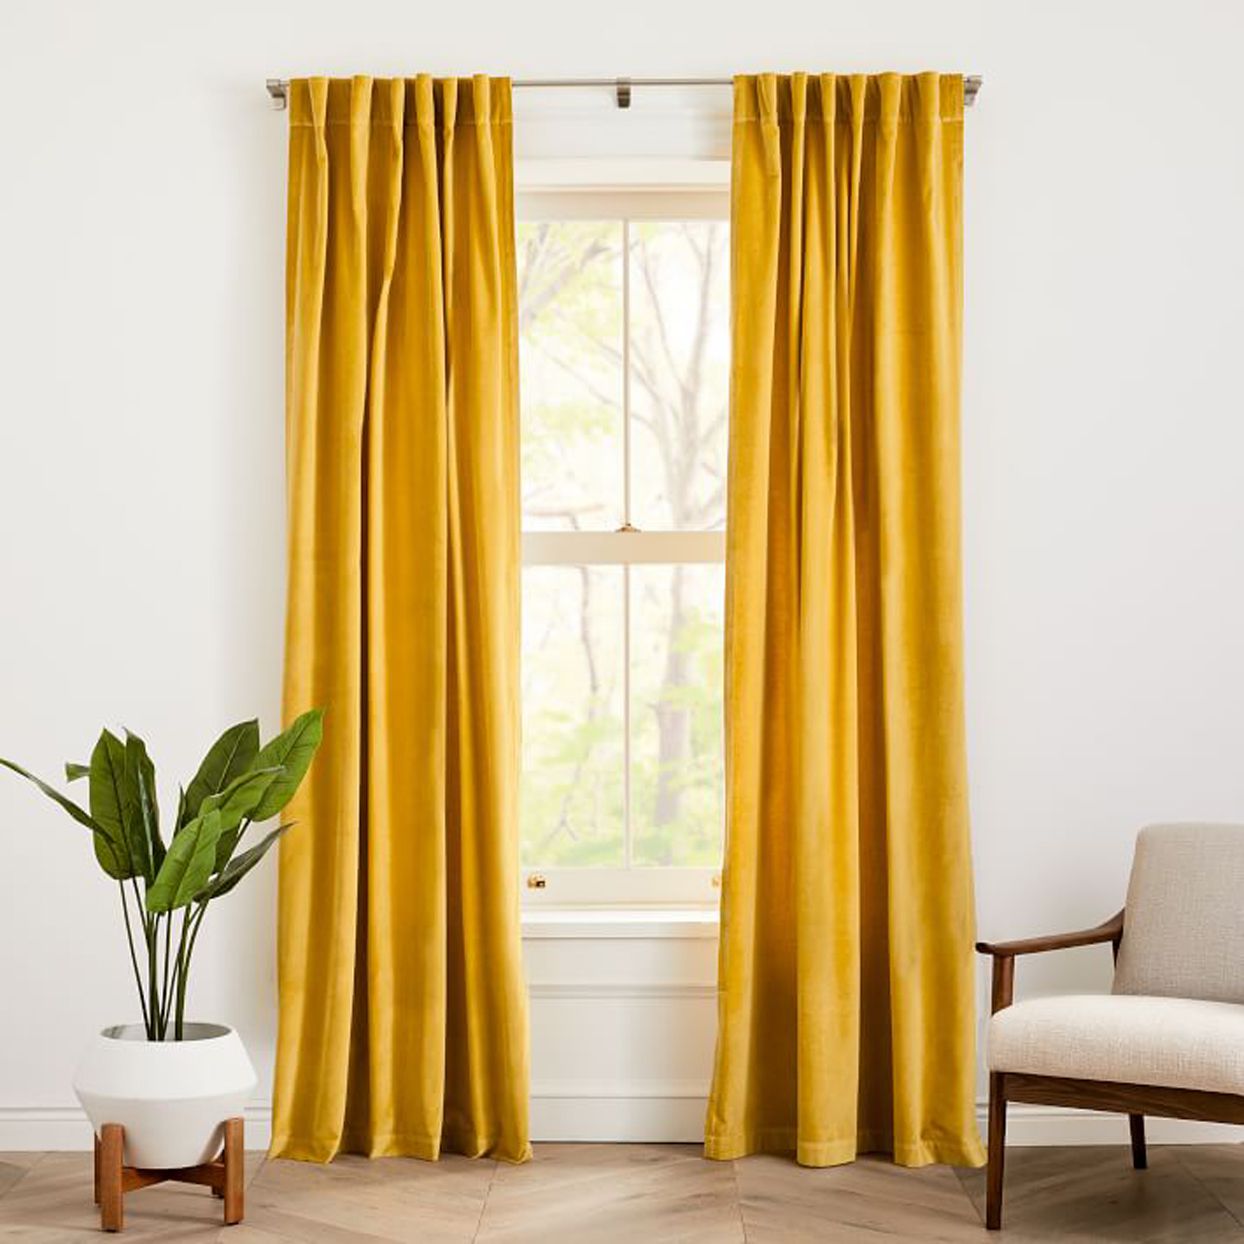 The Best Living Room Curtain Ideas, What Type Of Curtains Are Best For Living Room